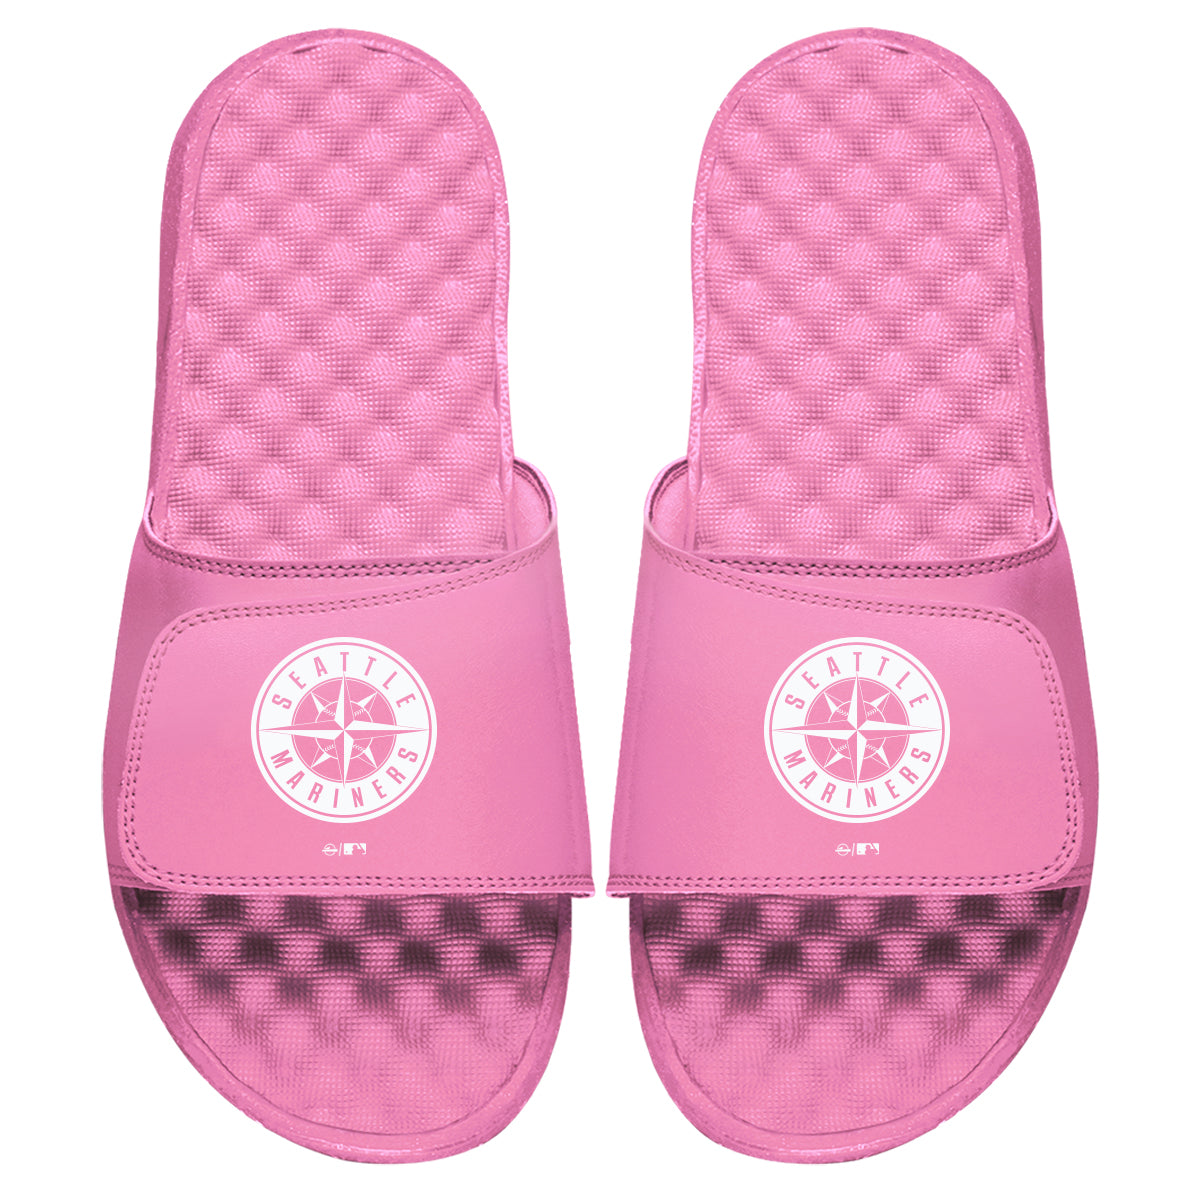 Seattle Mariners Primary Pink Slides